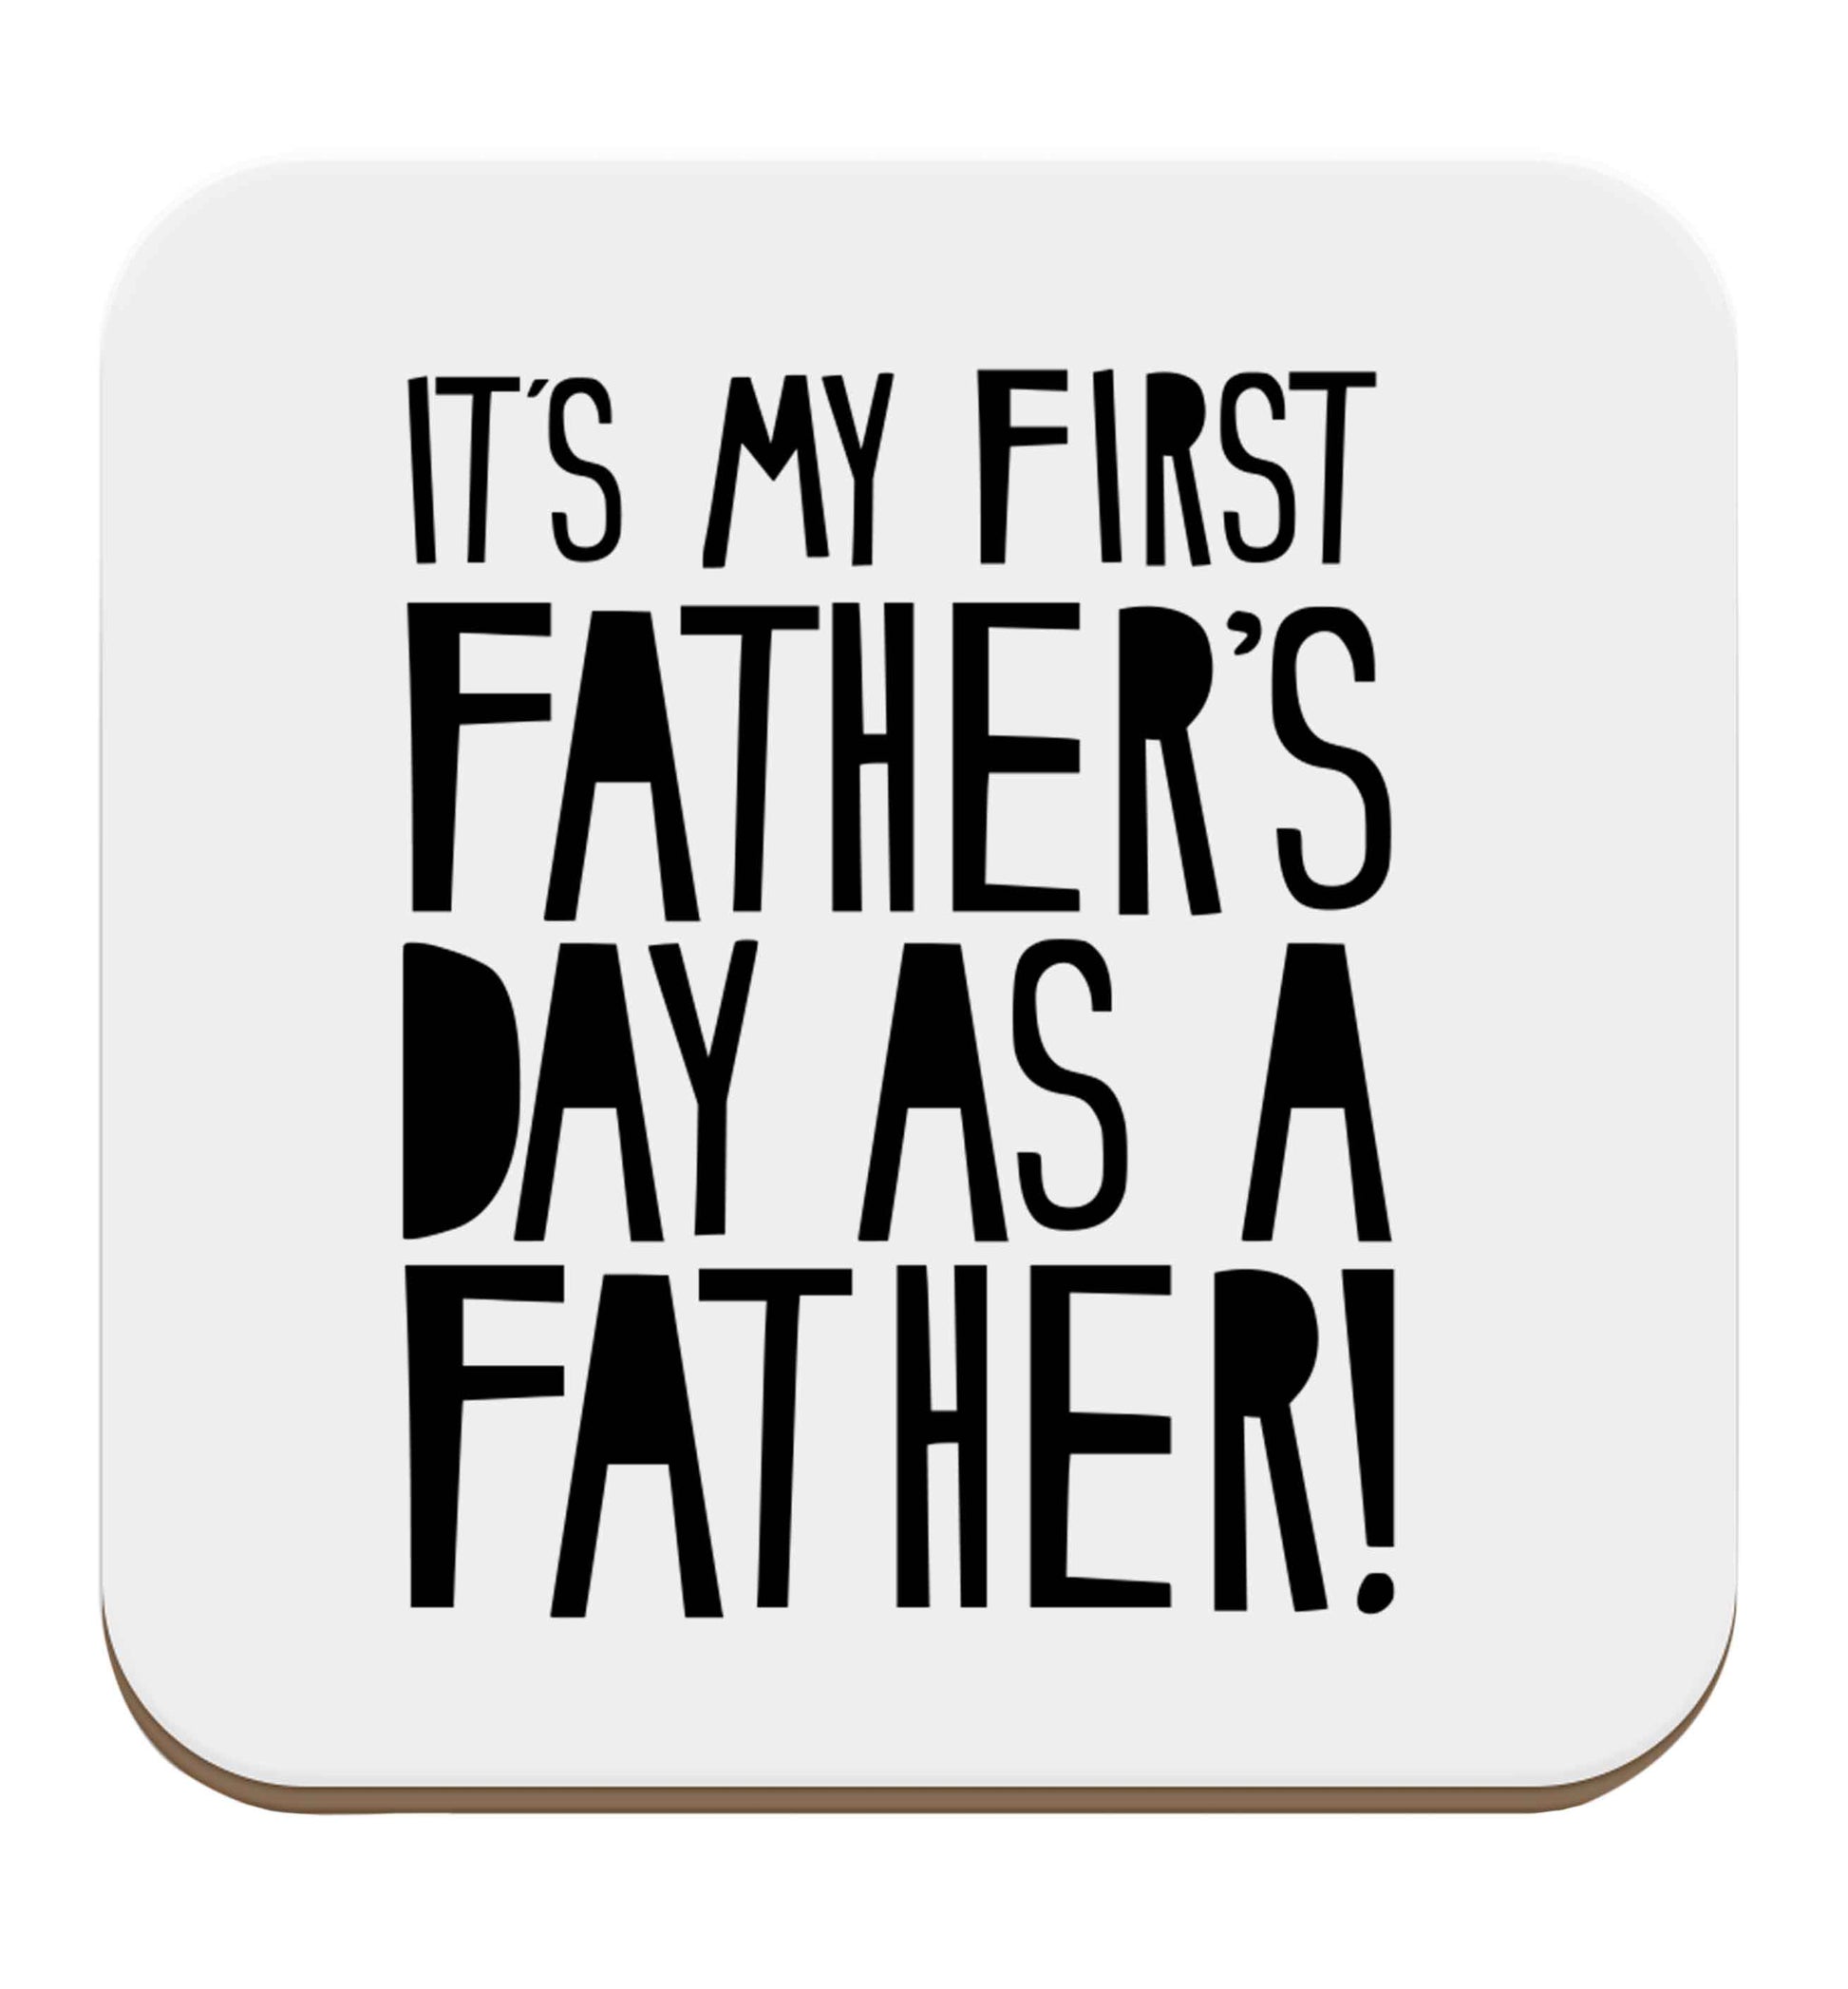 It's my first father's day as a father! set of four coasters